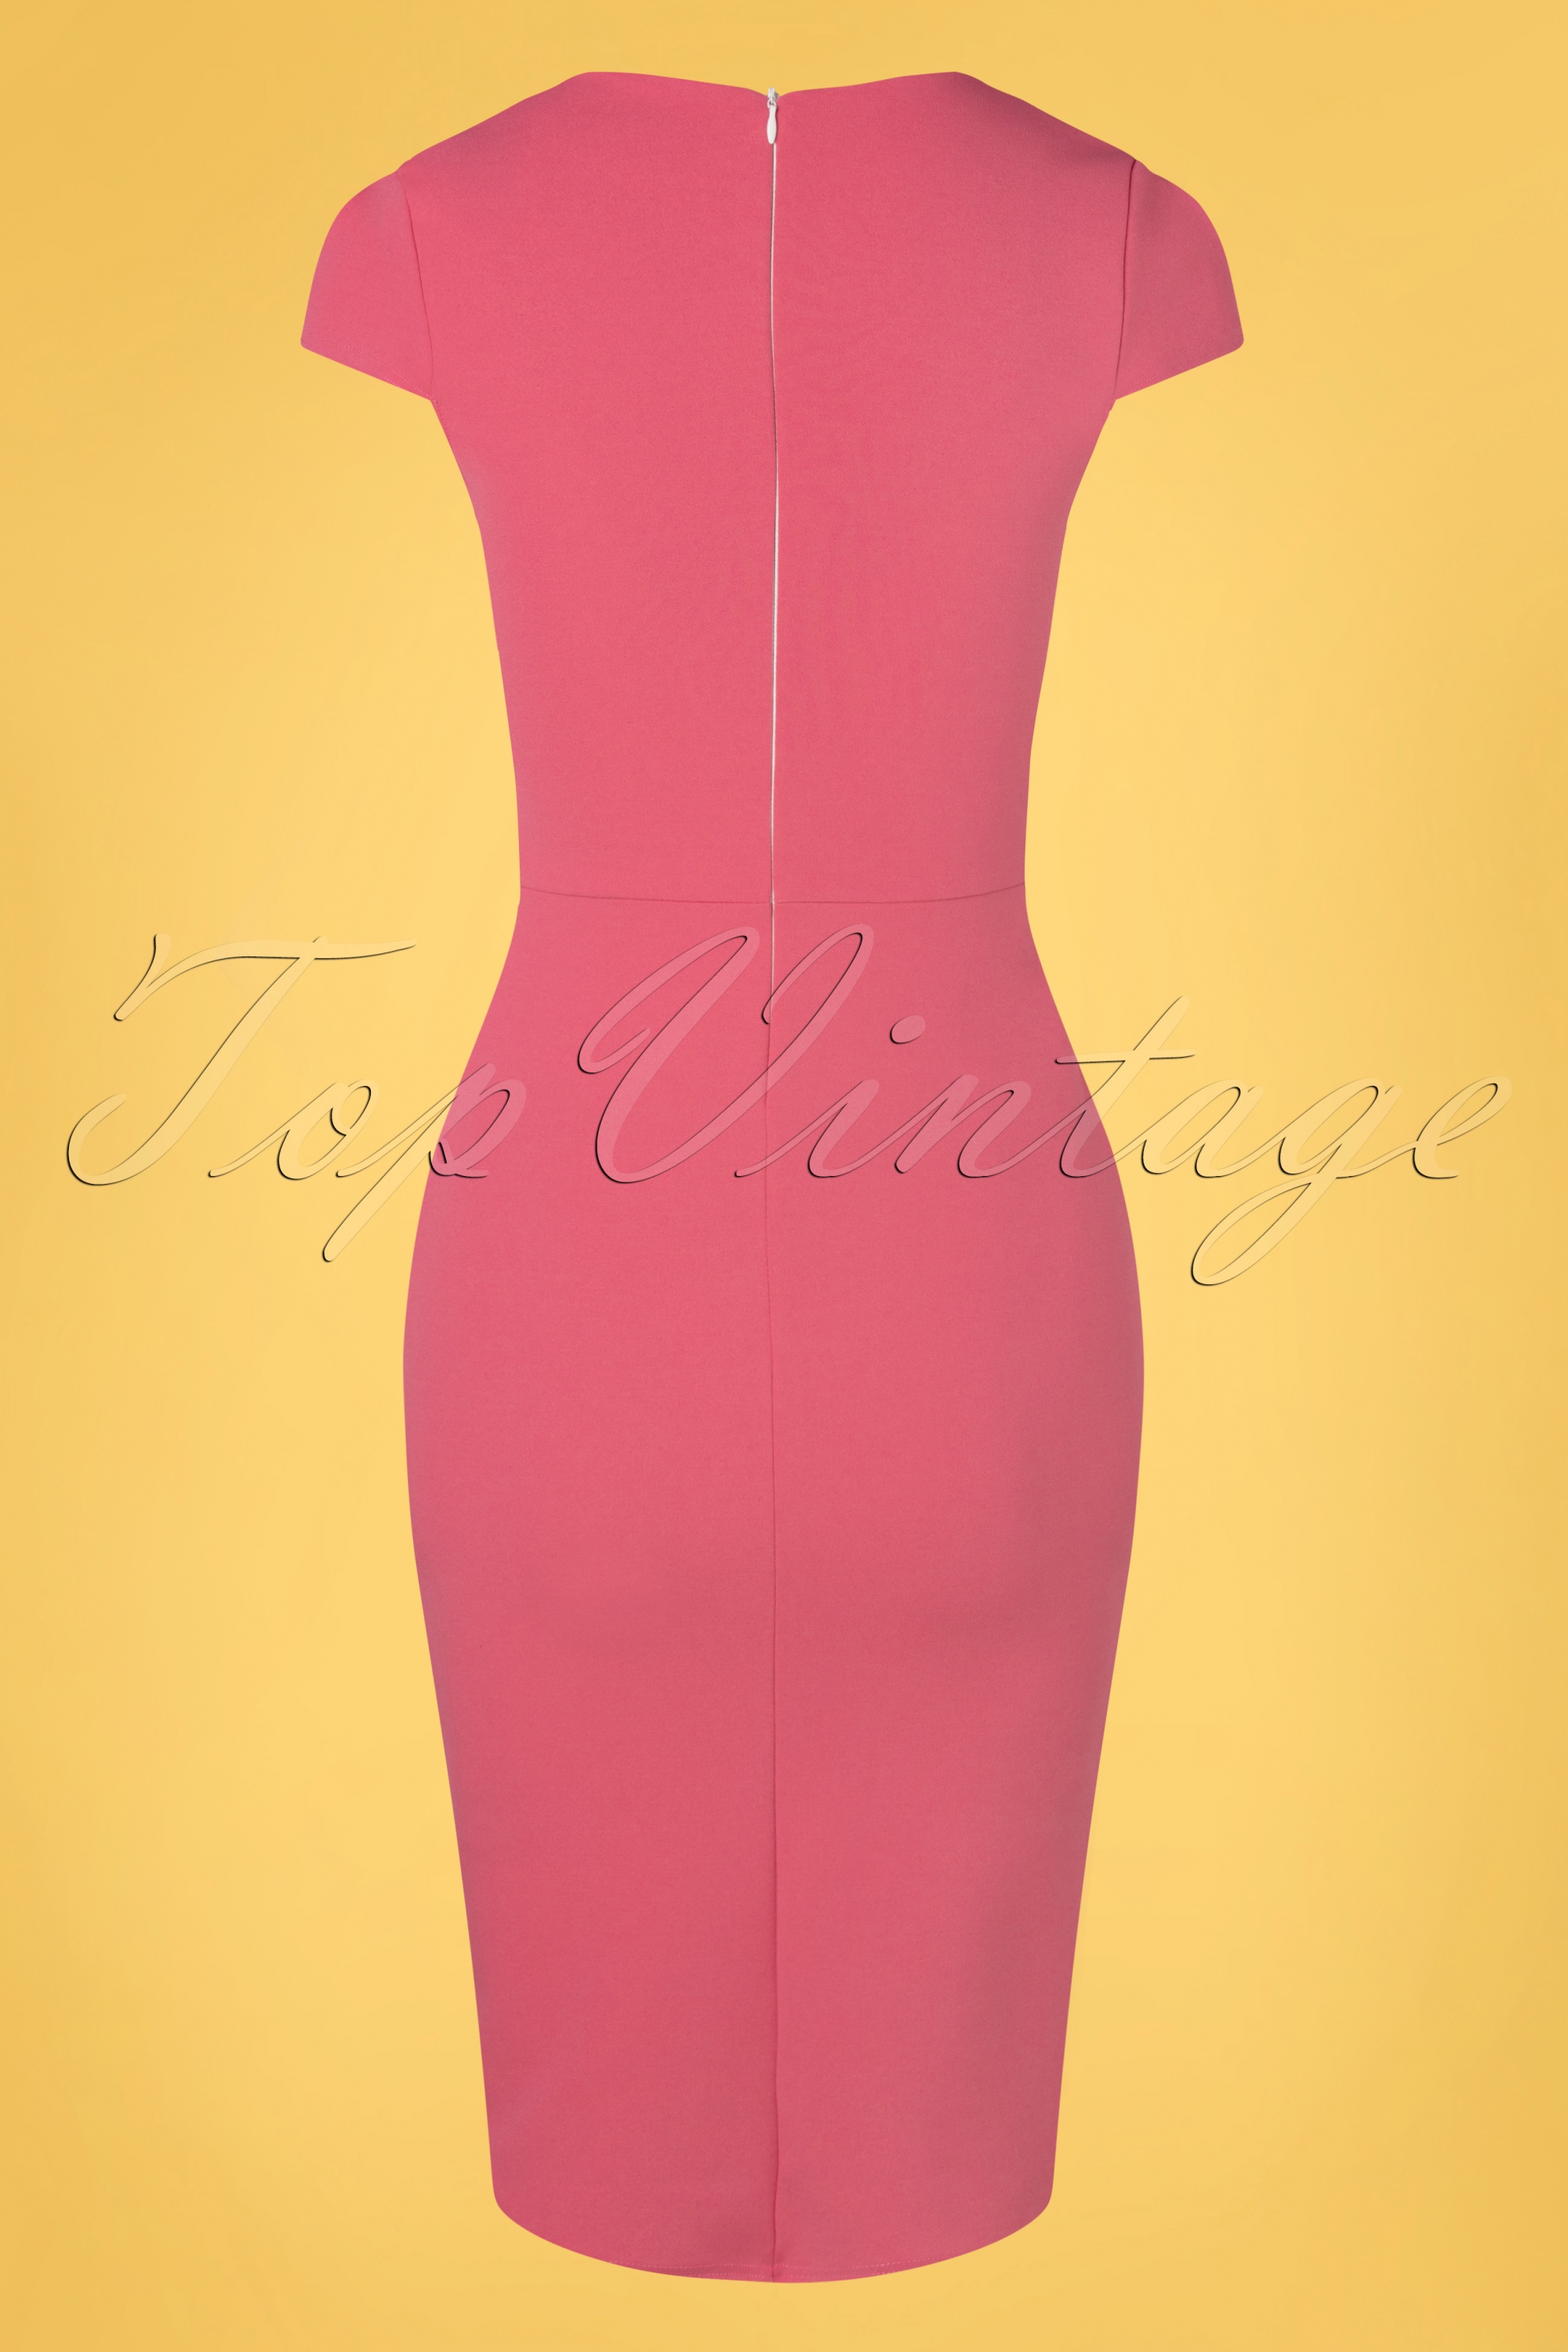 Vintage Chic for Topvintage - Rose pencil jurk in roze  2